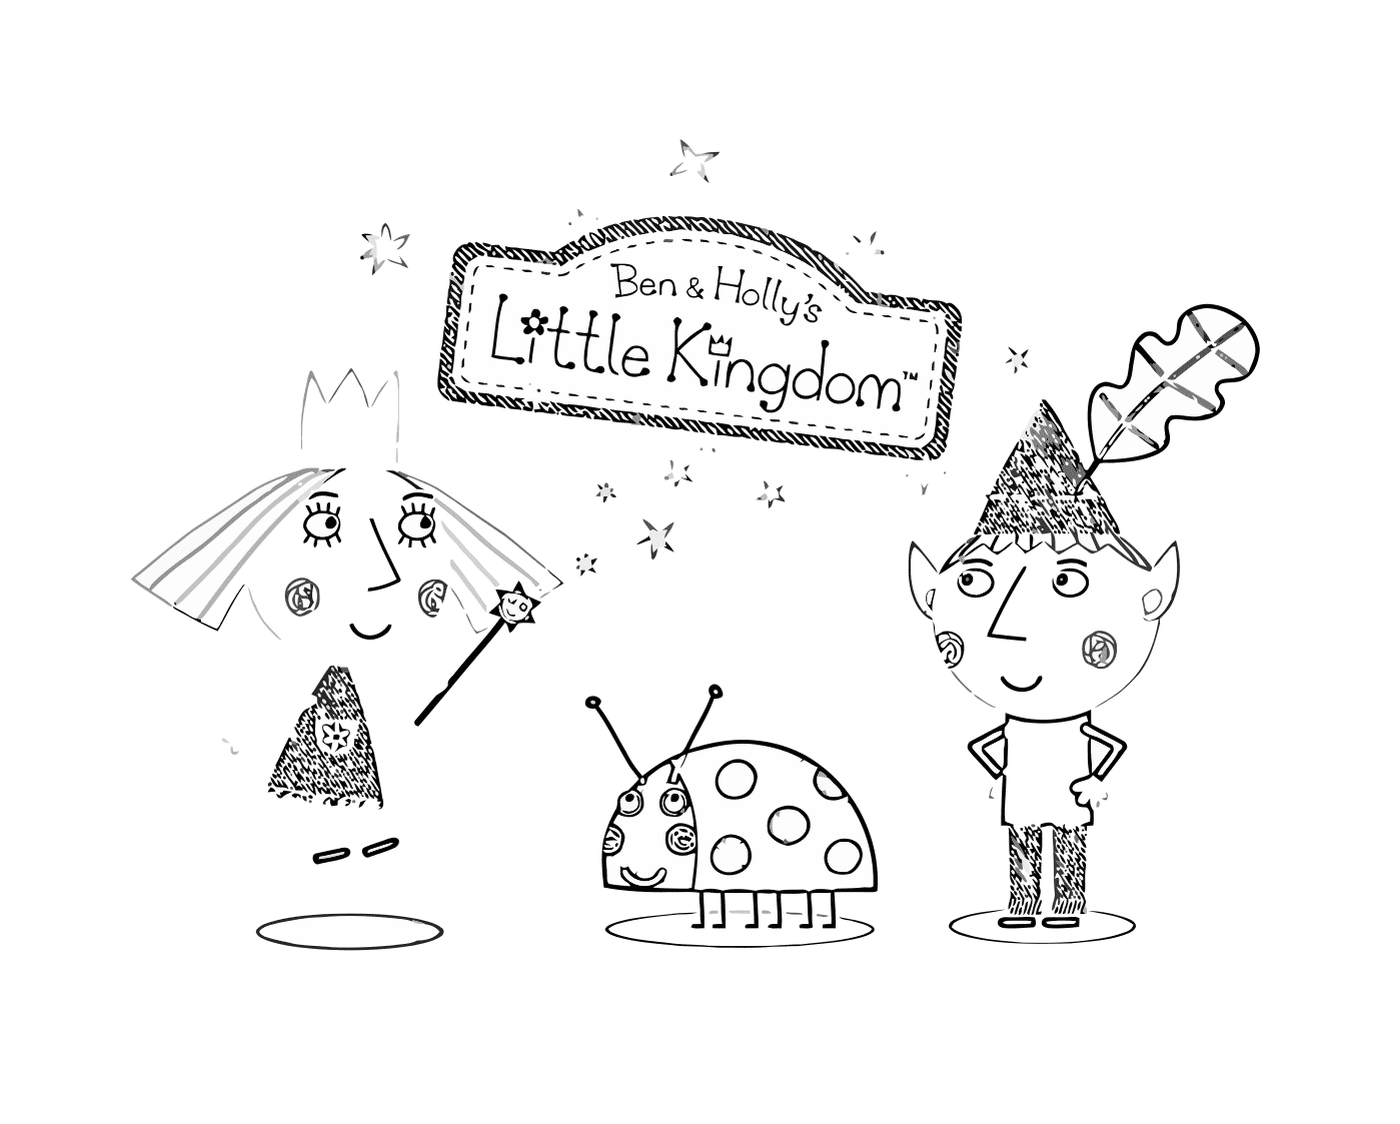 ben and holly little kingdom